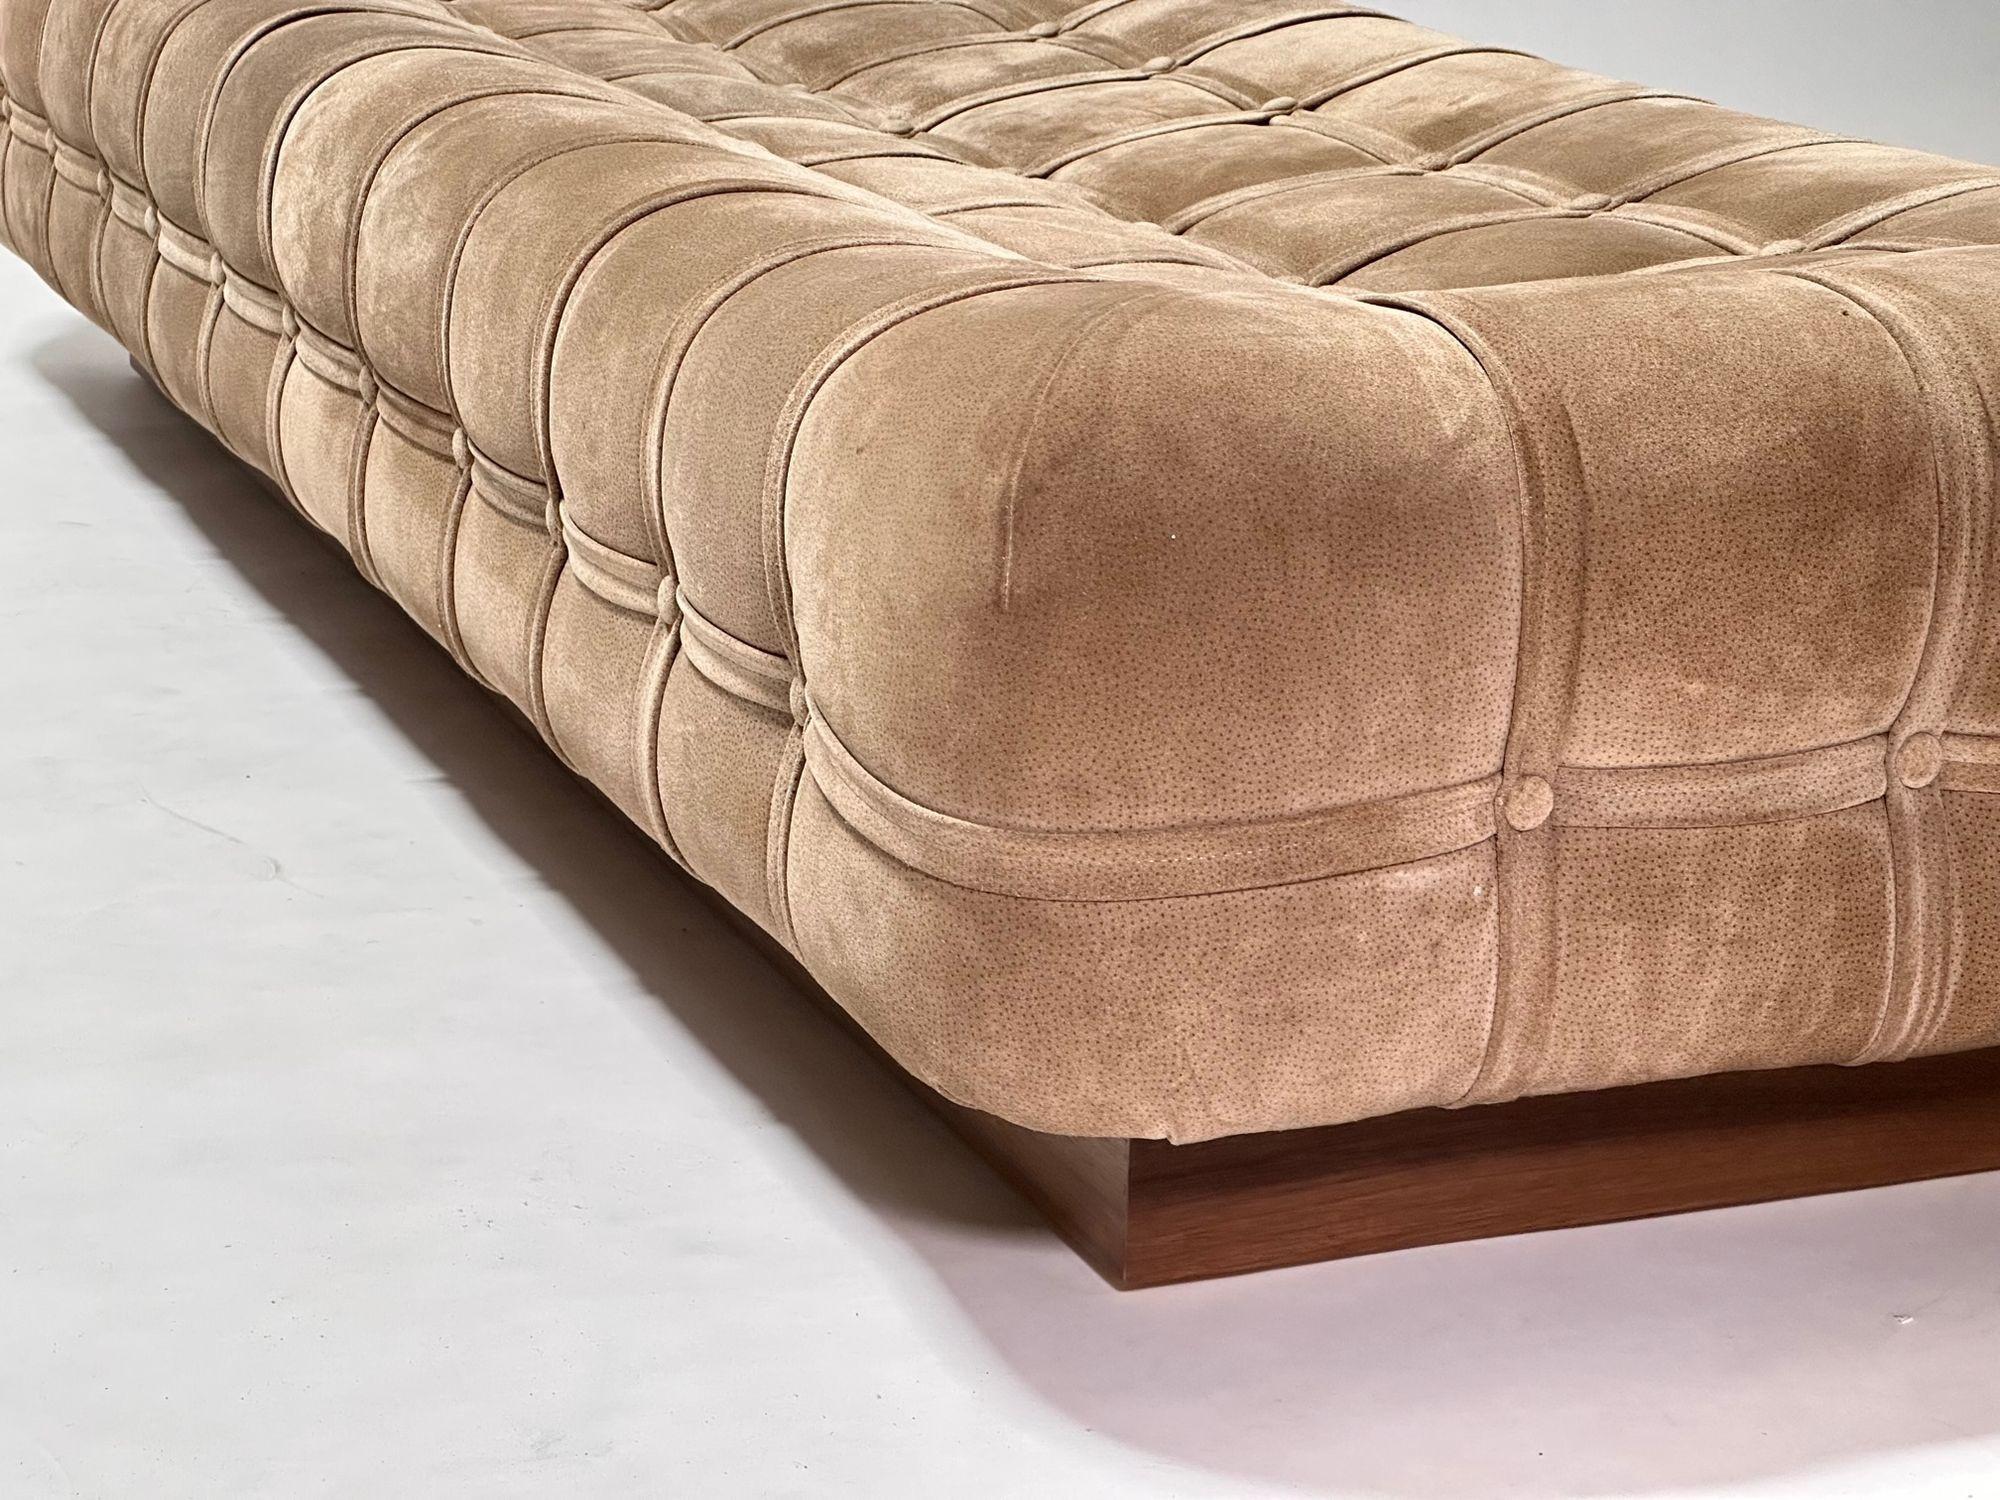 Late 20th Century Suede Marshmallow Pouf Bench/ Daybed on Walnut Plinth Base, 1970 For Sale